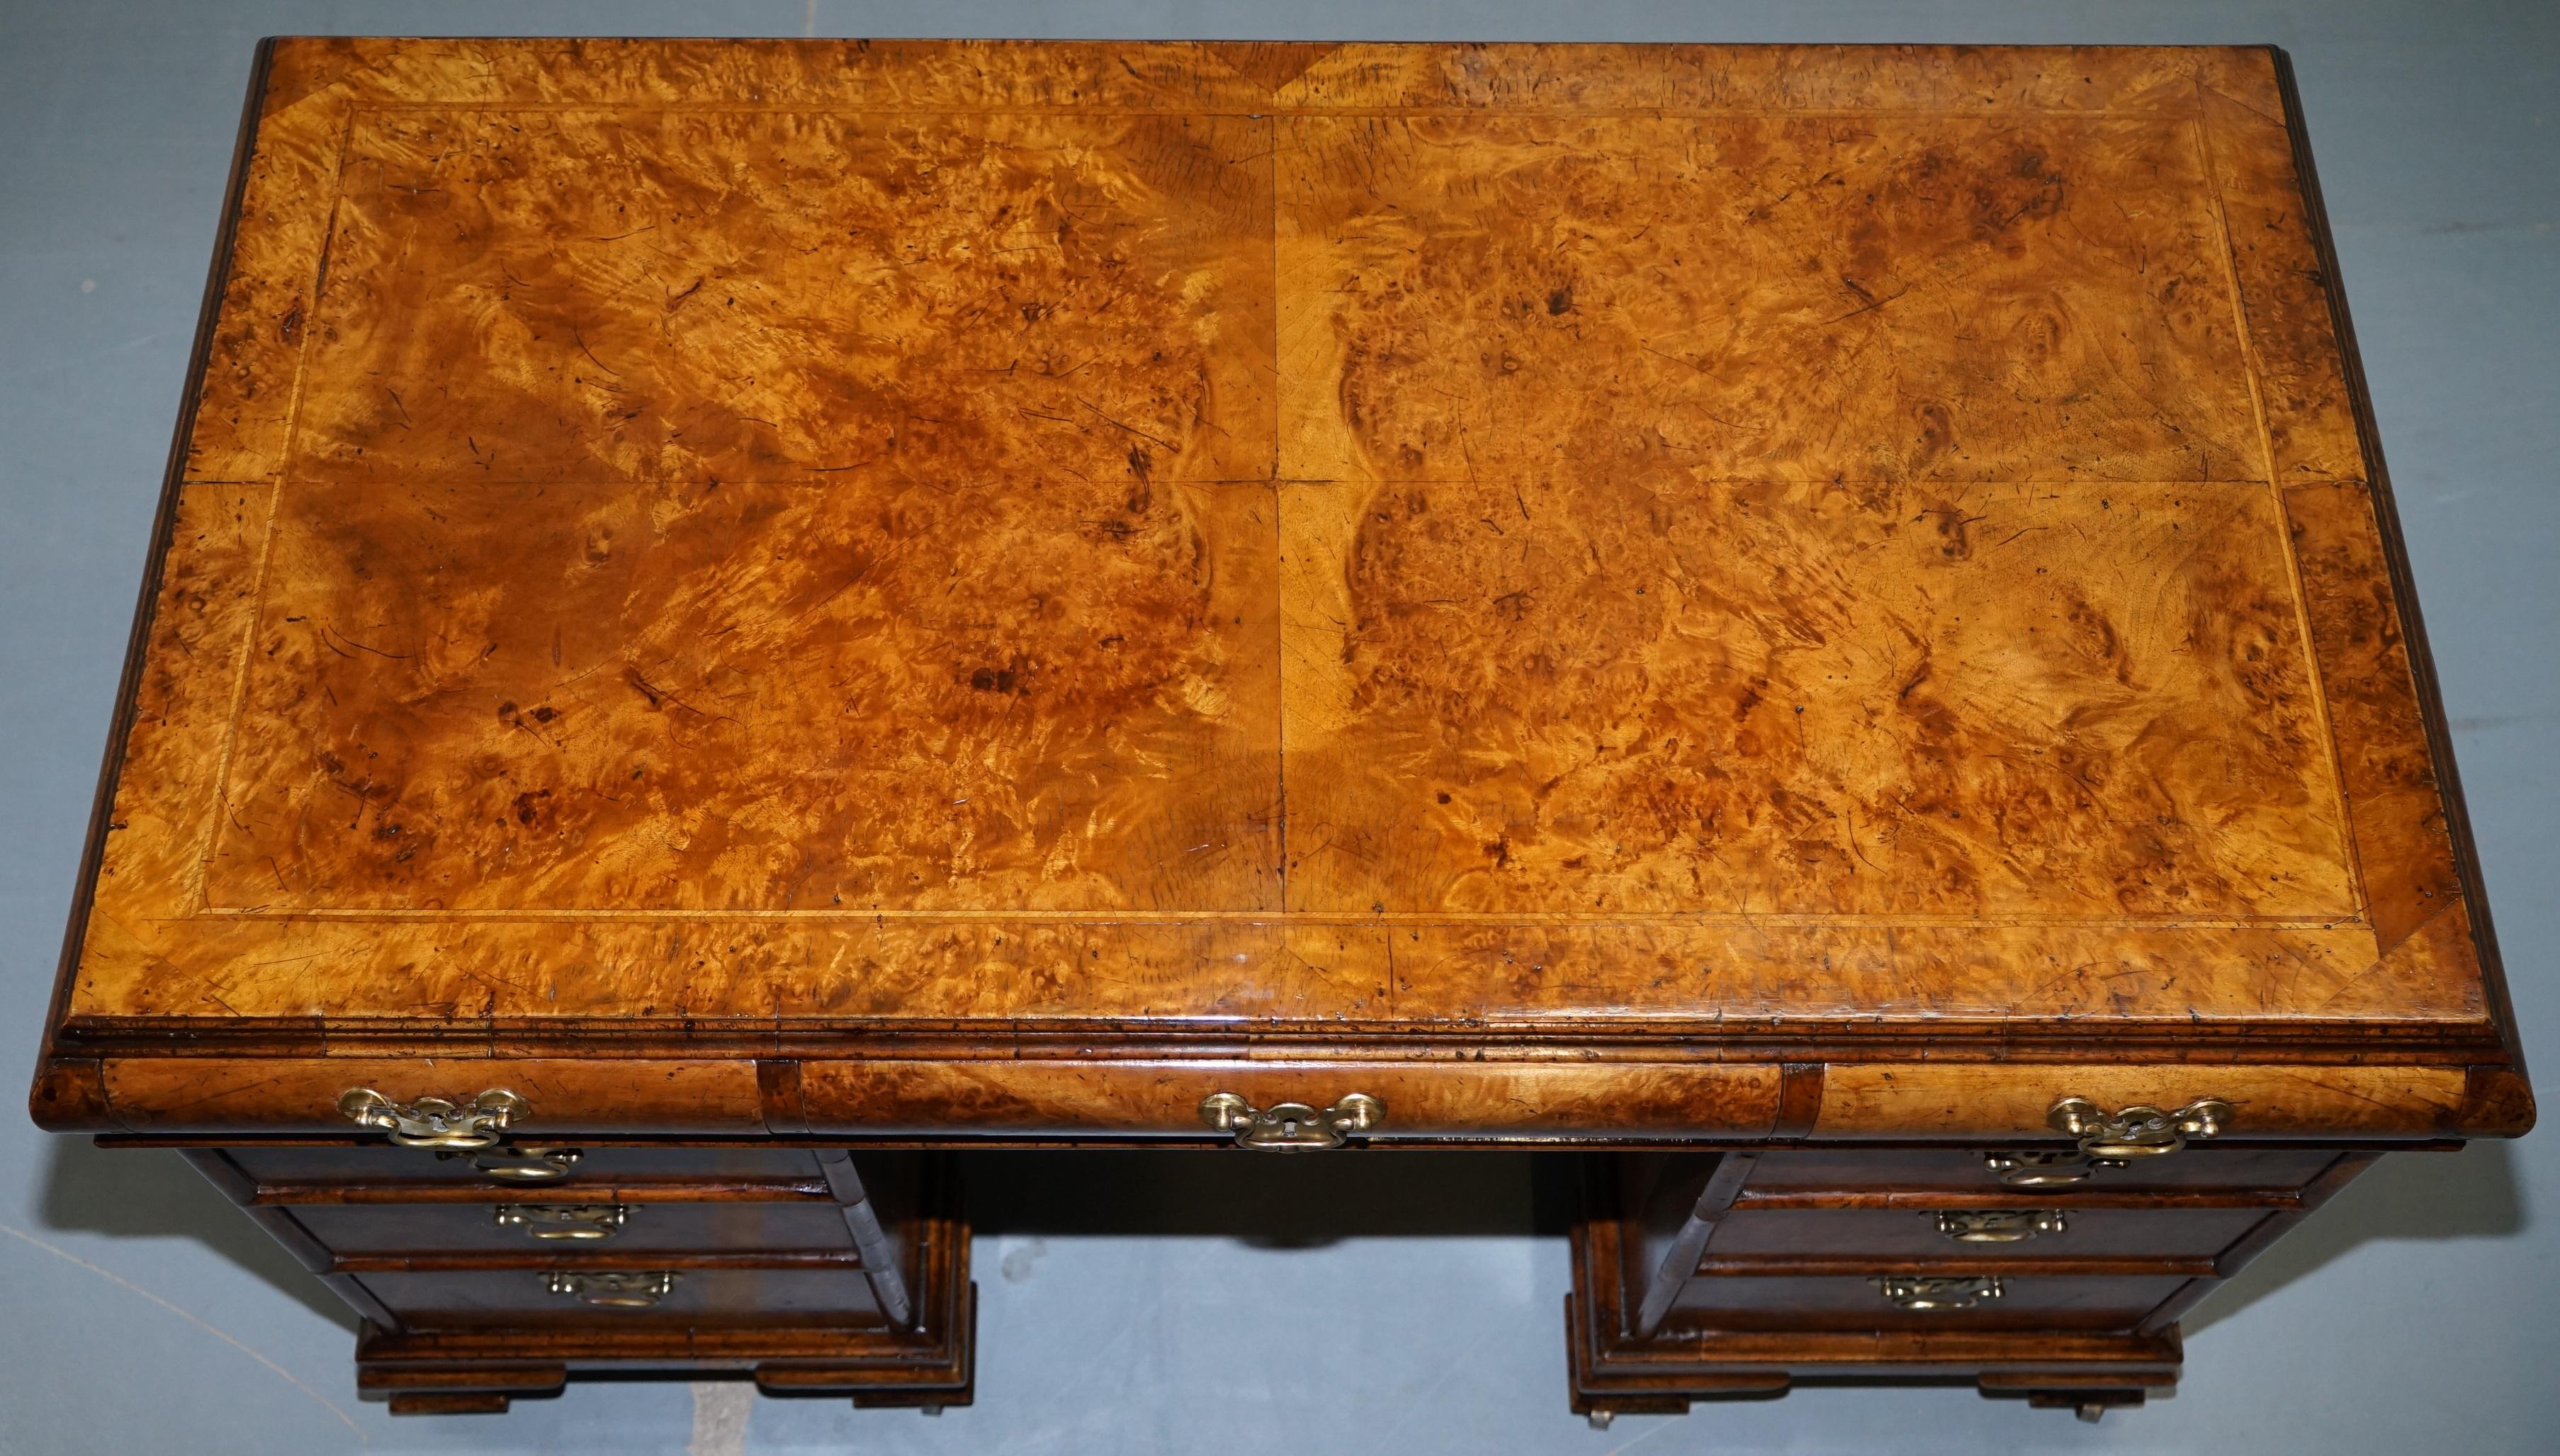 Hand-Carved Extremely Rare Regency circa 1815 Solid Burr Walnut Curved Twin Pedestal Desk